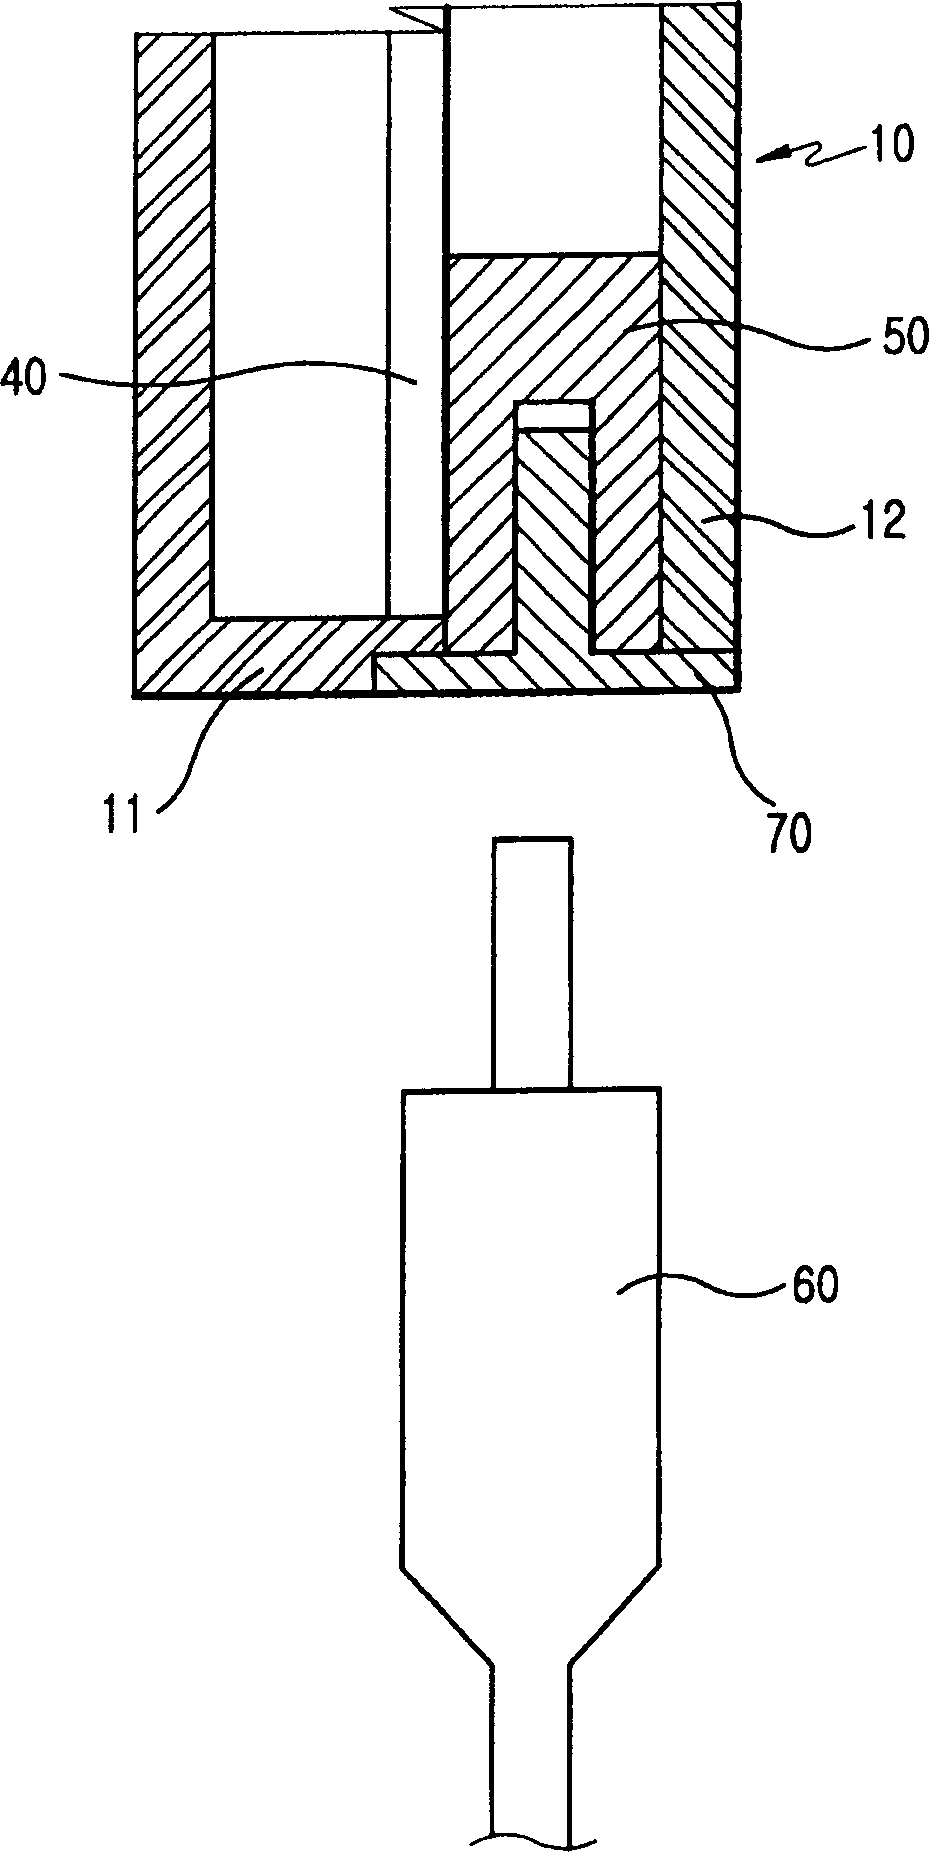 Interface connector cover opening and closing apparatus for mobile communications terminals